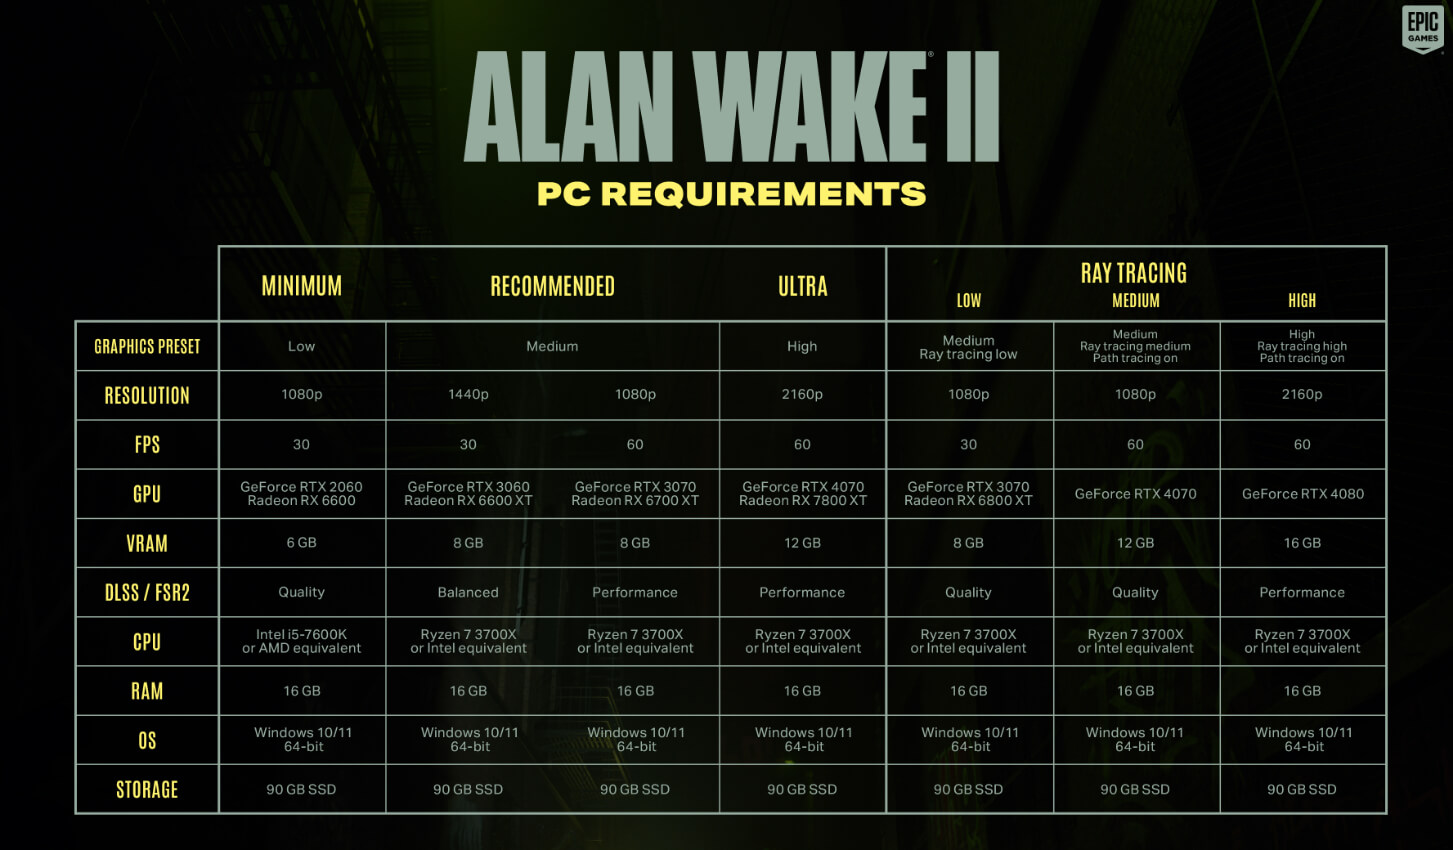 Old Alan Wake 2 PC Requirements